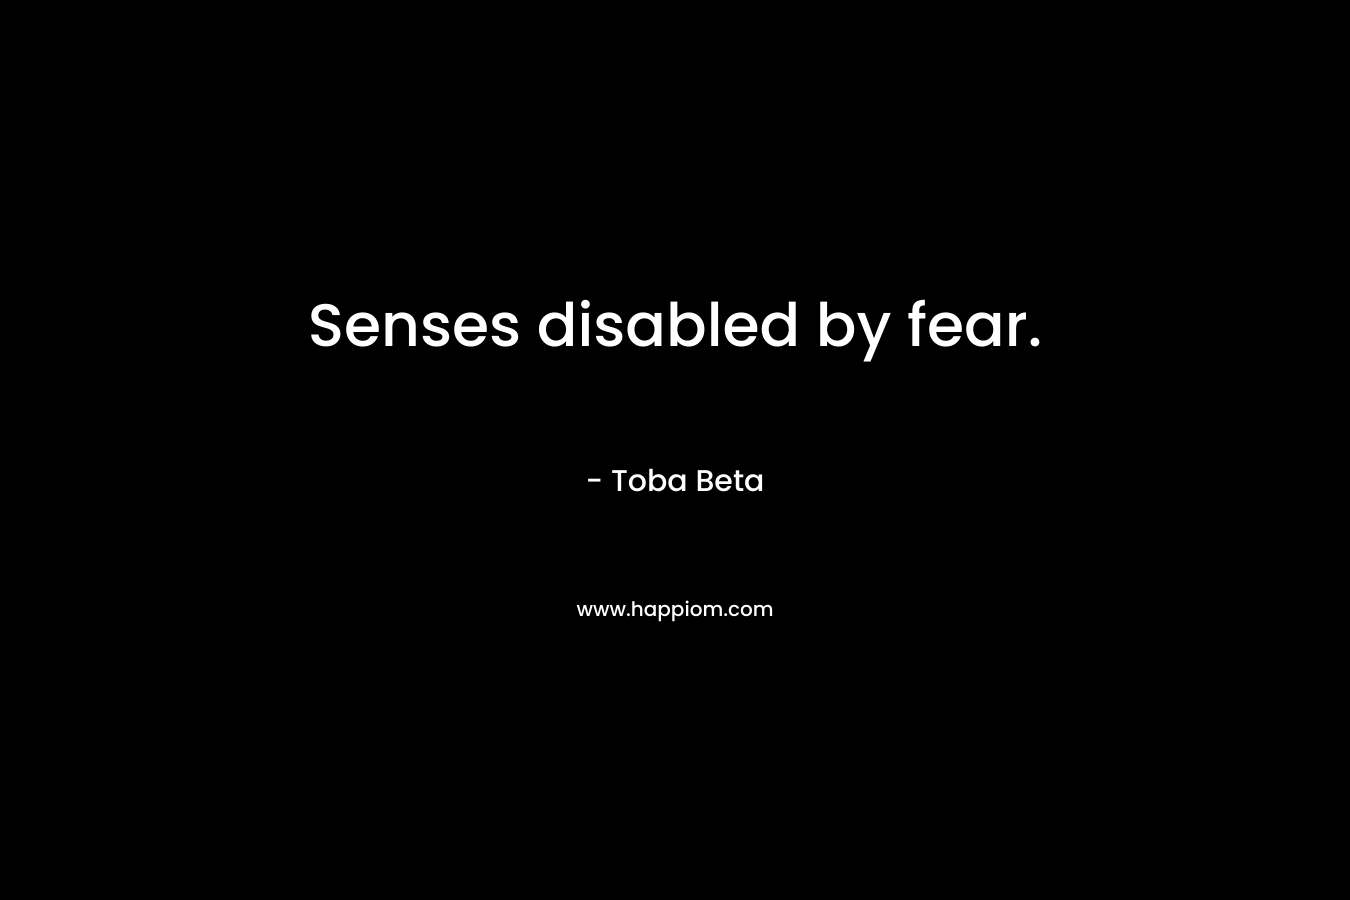 Senses disabled by fear.